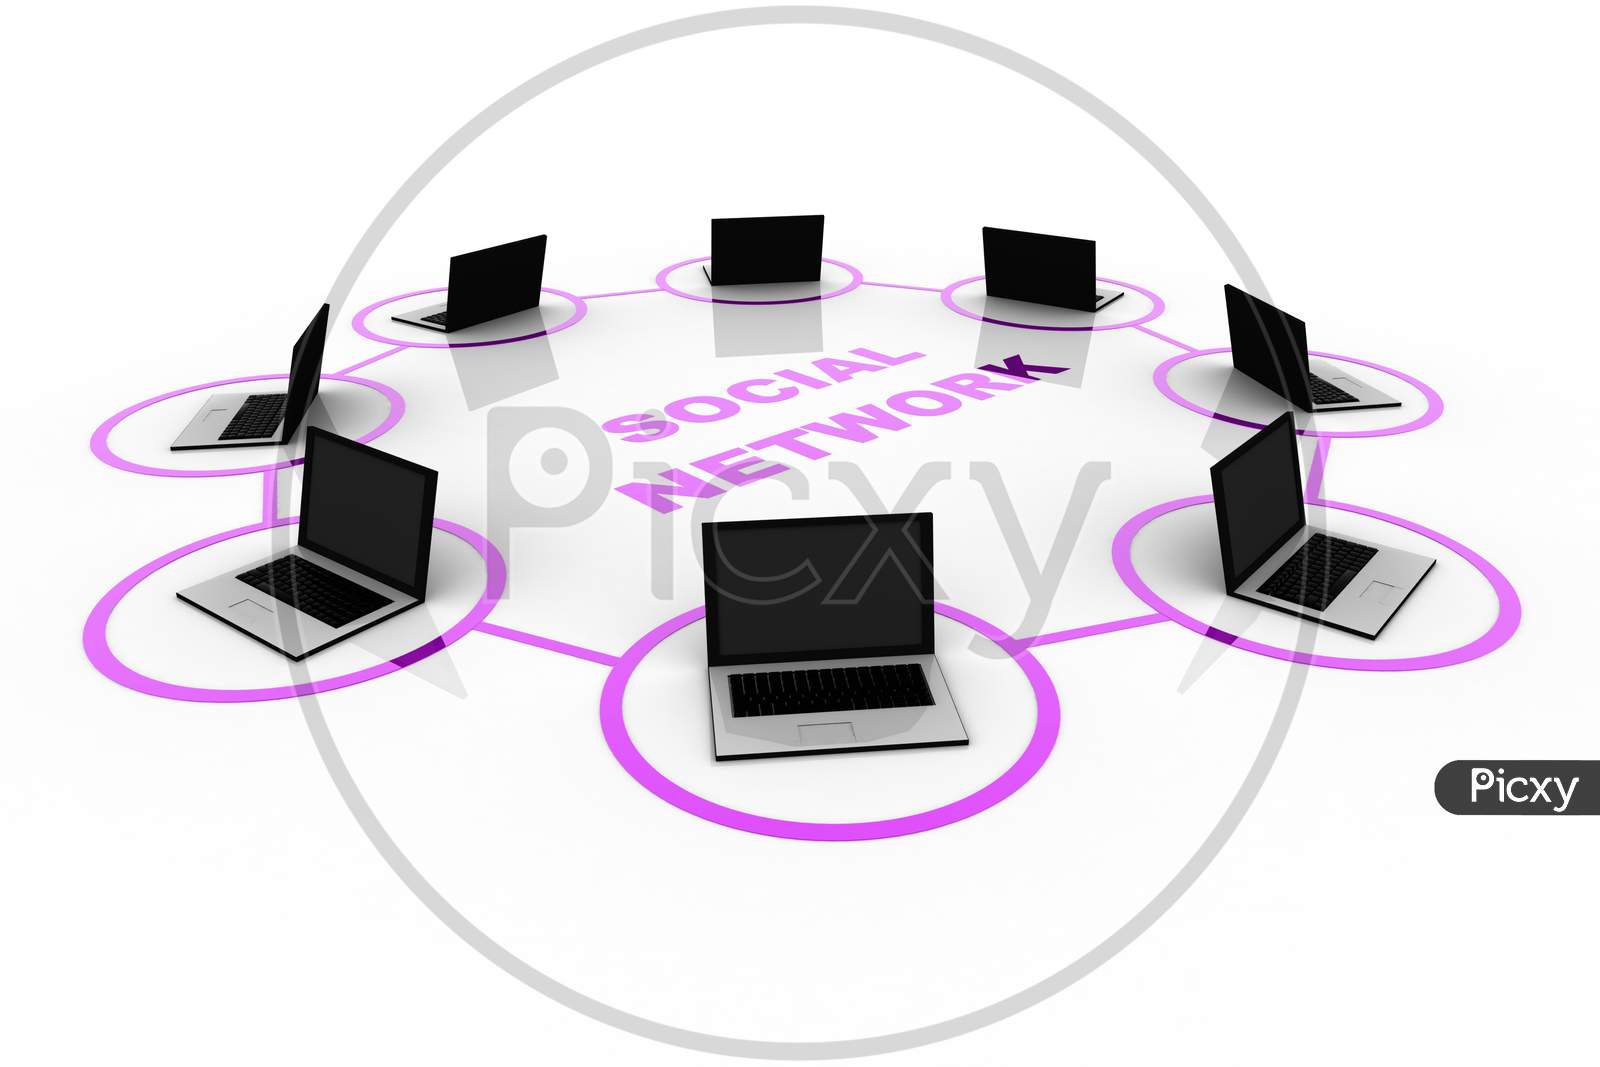 Laptops in a Circular Pattern with Social Network Written